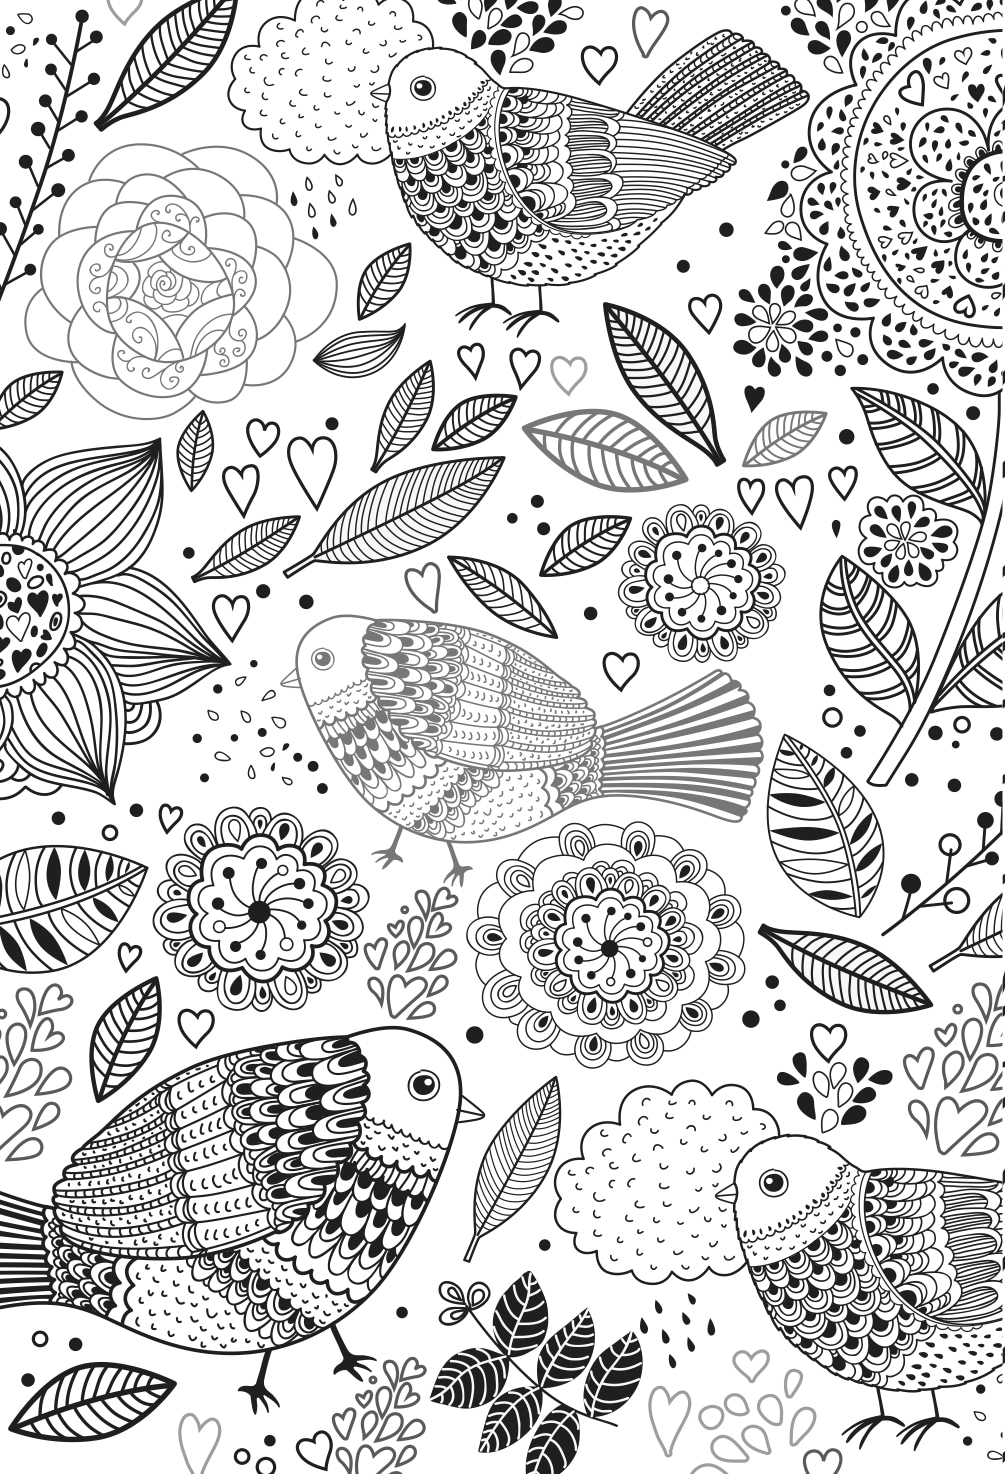 birds colouring page including mandala designs and leaves. stress relieving relaxing colouring for grown ups